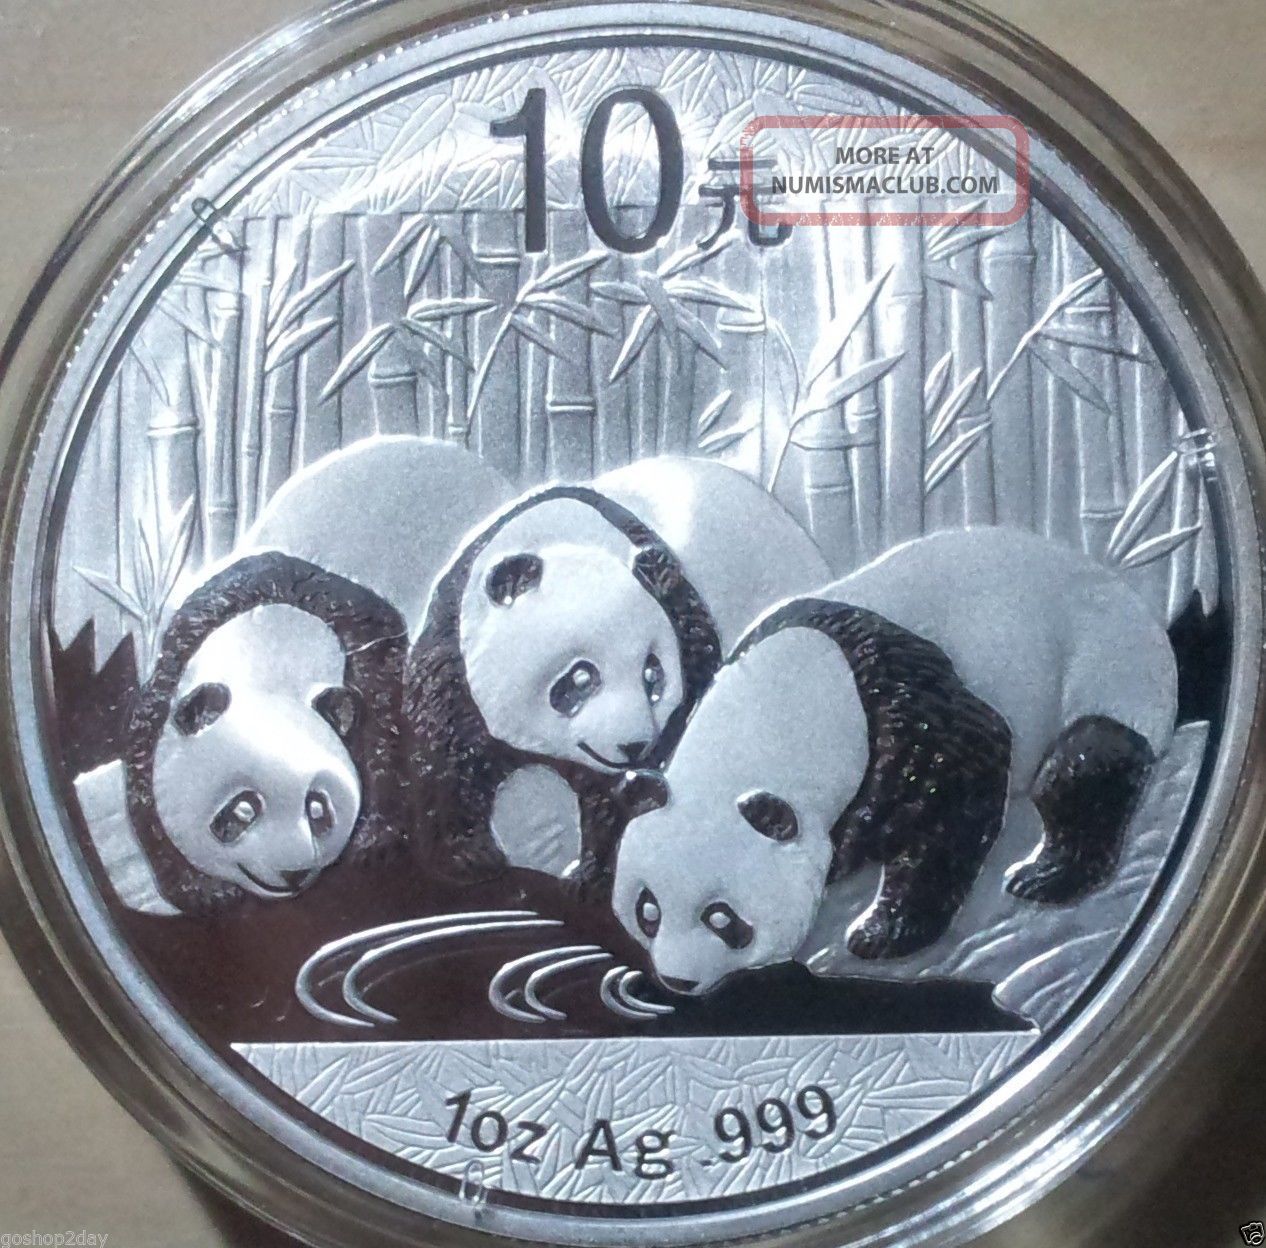 Up To 2 - 2013 China Panda 10 Yuan 1 Troy Oz 999 Fine Silver In Plastic